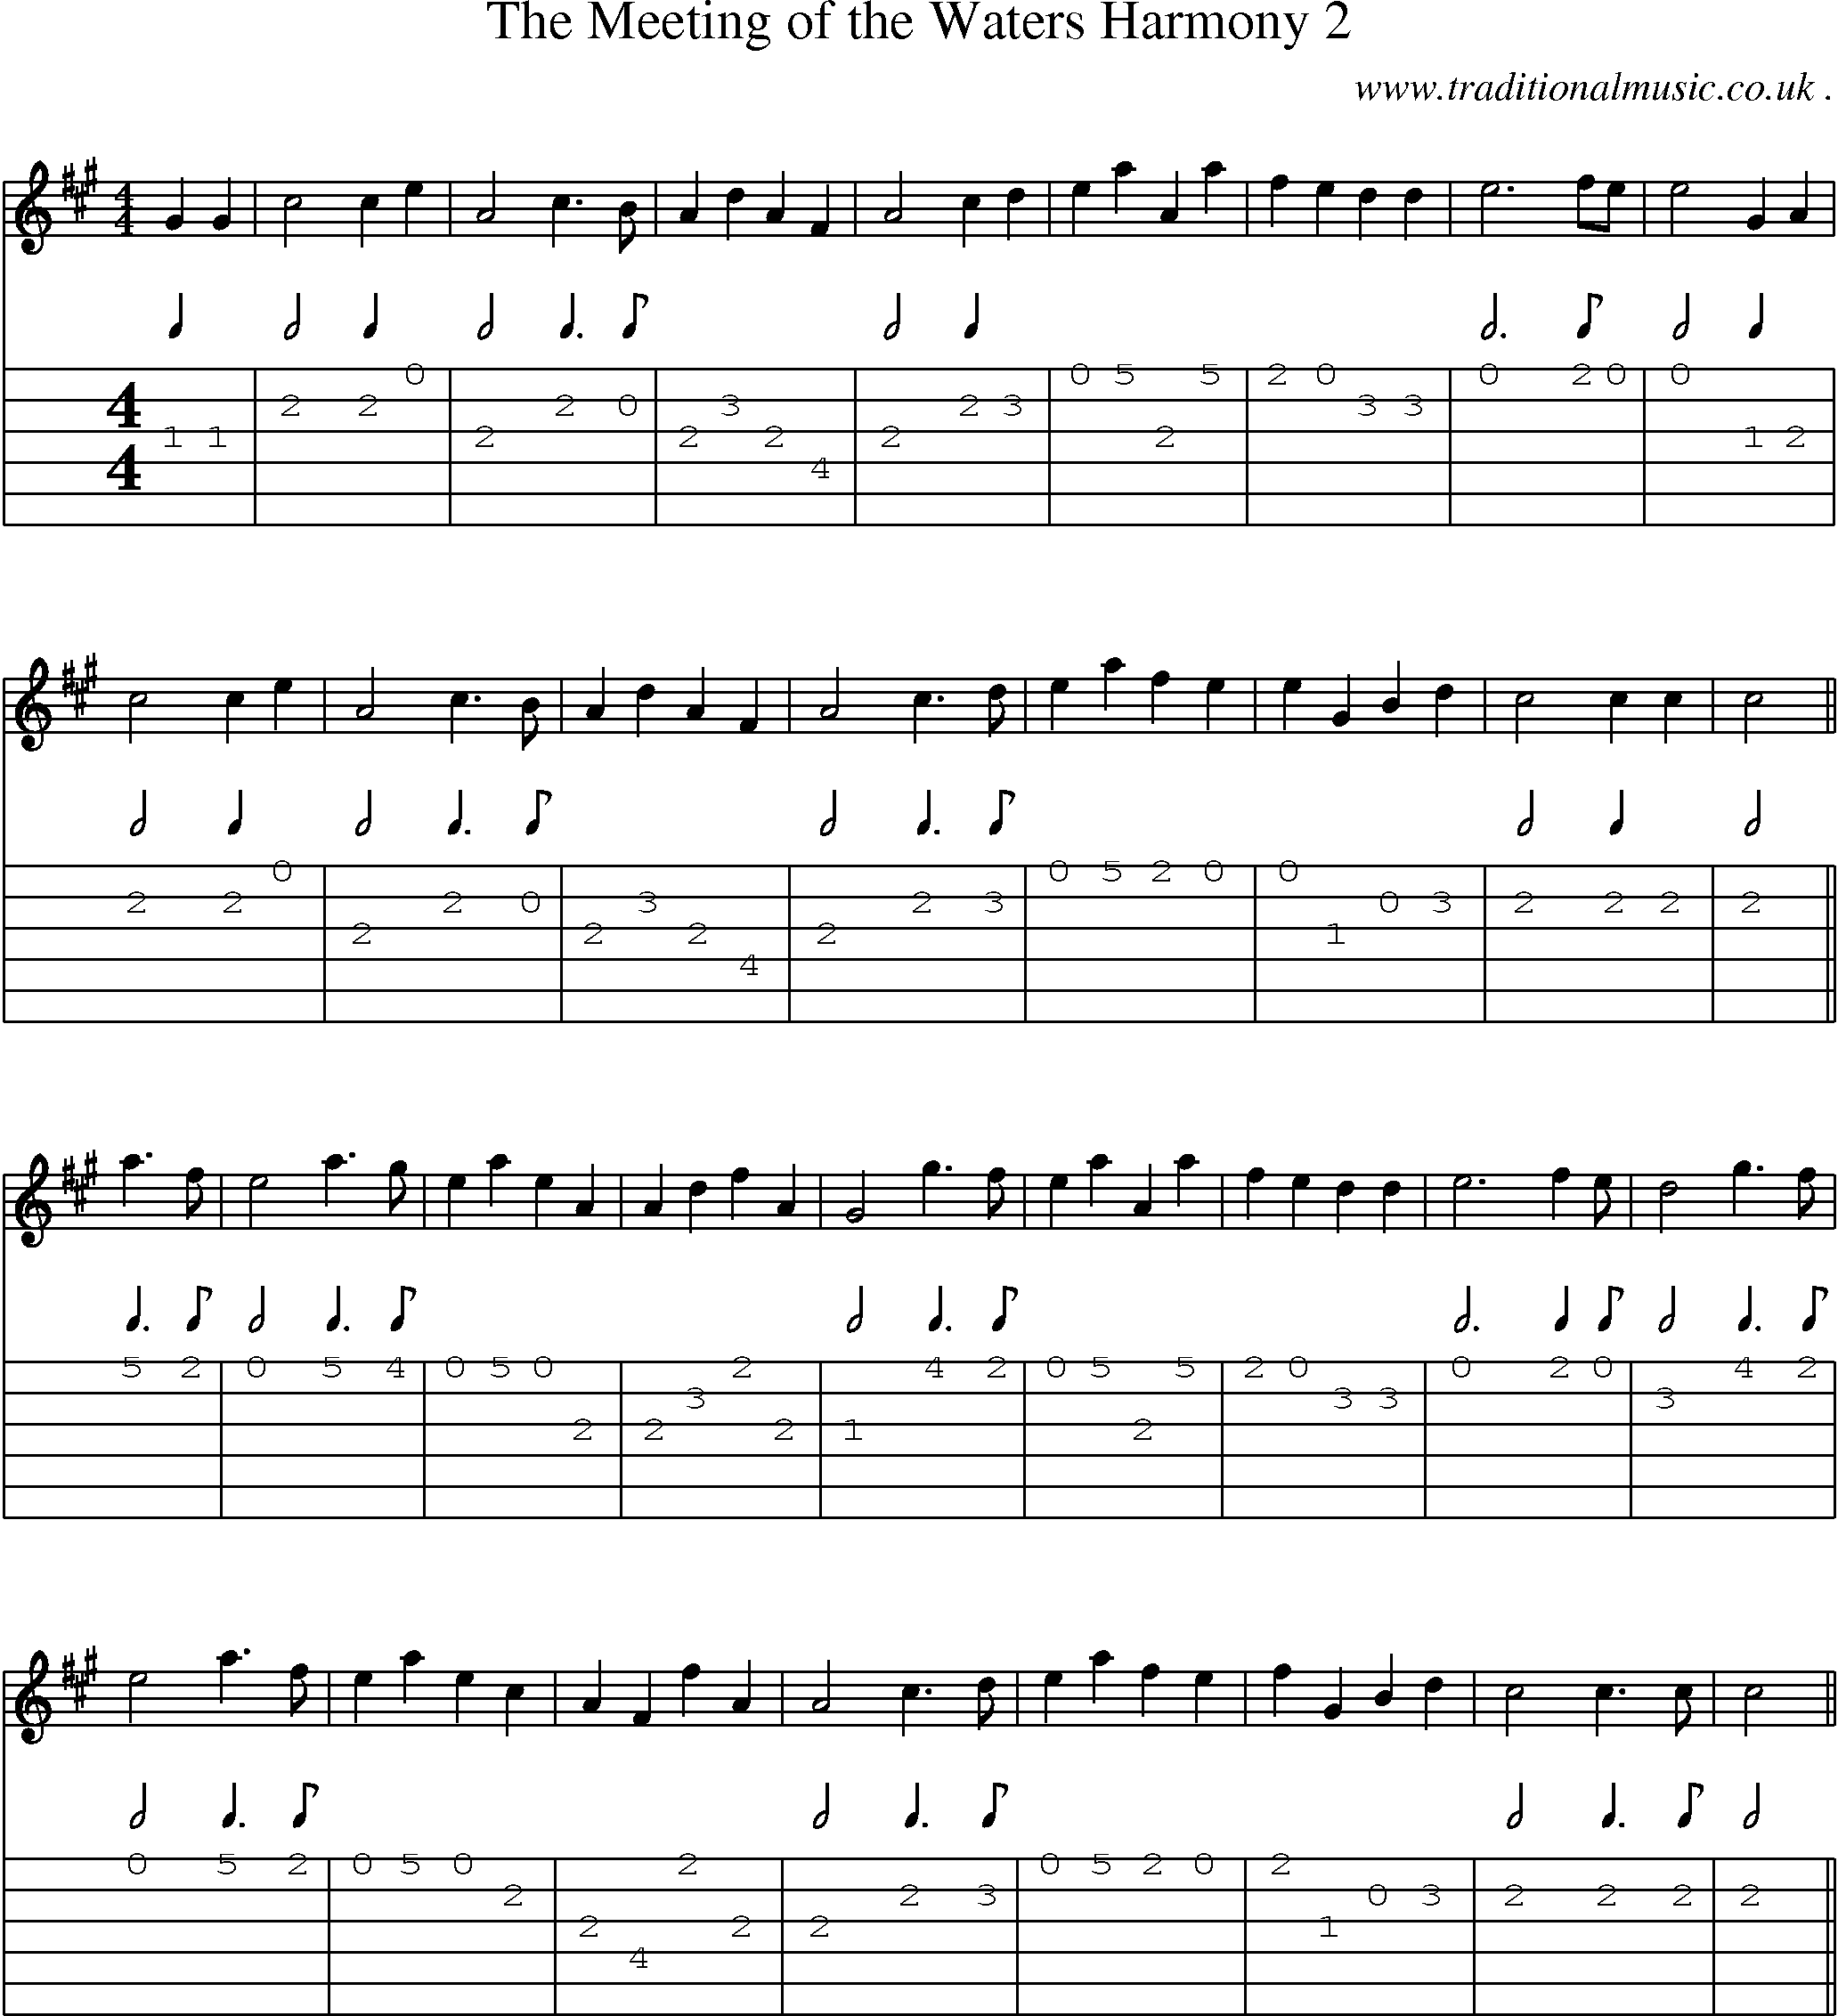 Music Score and Guitar Tabs for The Meeting Of The Waters Harmony 2